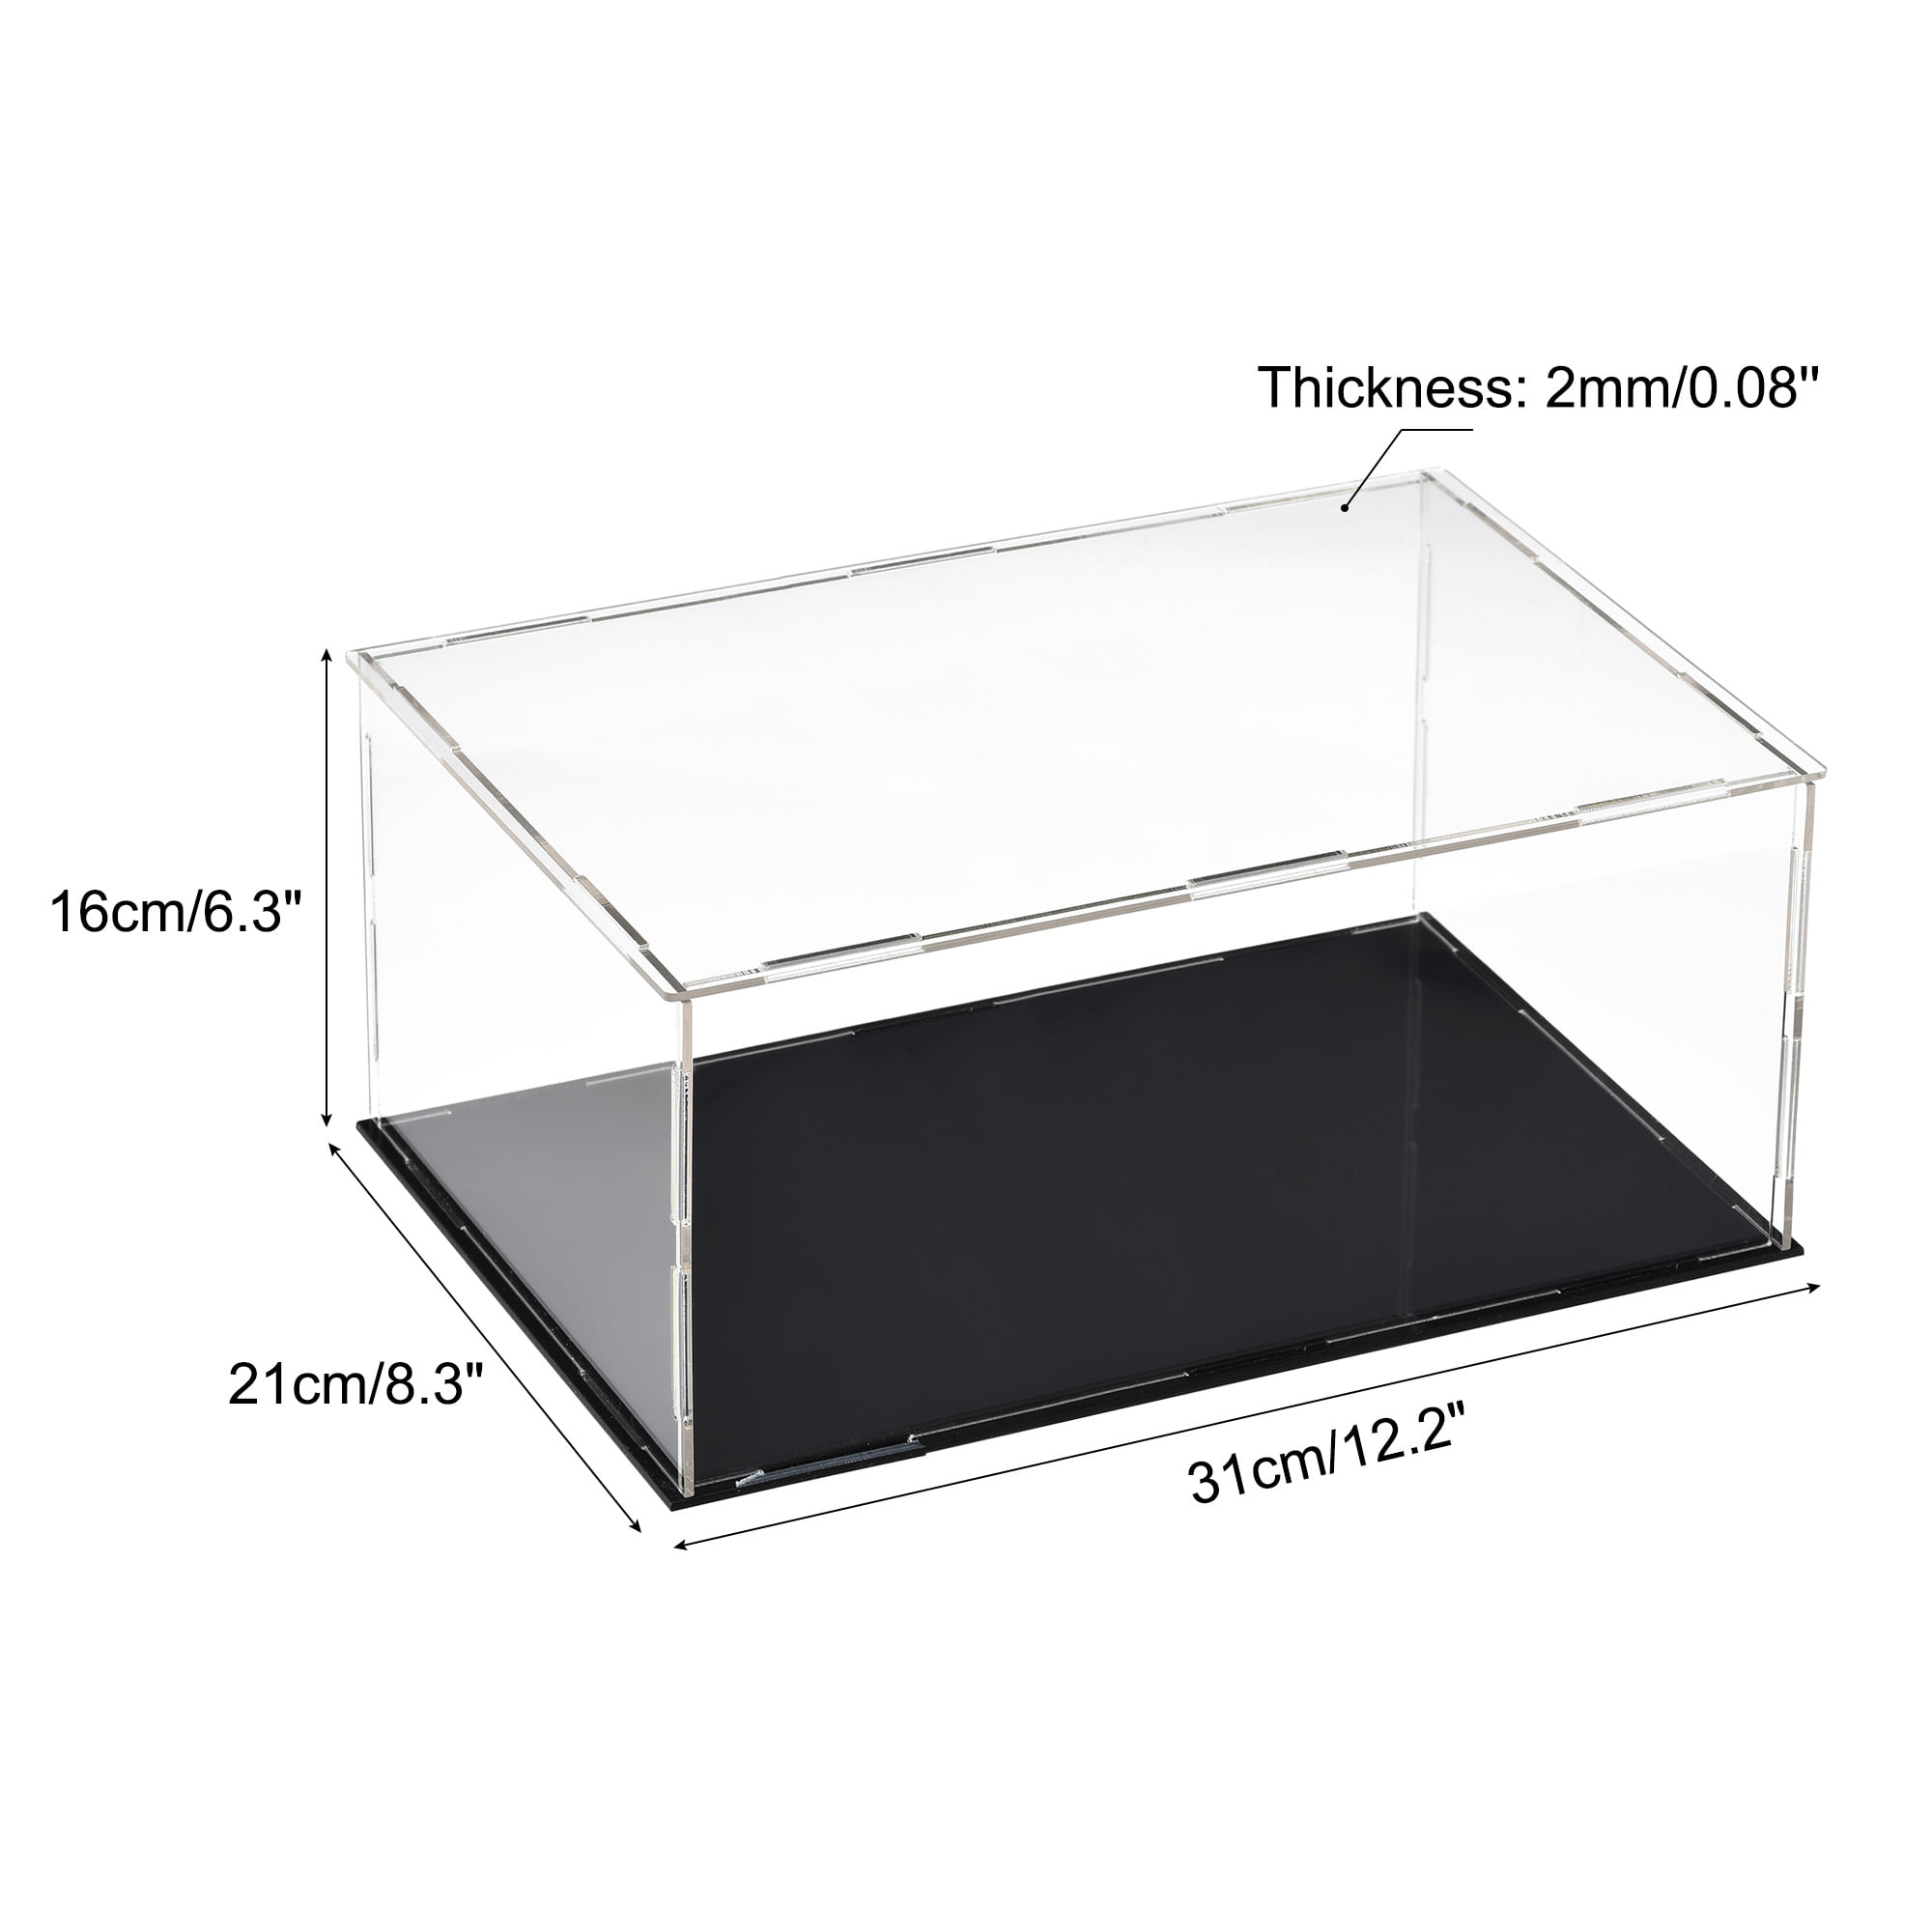 Uxcell Display Case Box Acrylic Box Transparent Dustproof Protection Showcase 16x16x11CM for Collectibles, Size: 16x16x11cm/6.3x6.3x4.3 inch, Blue